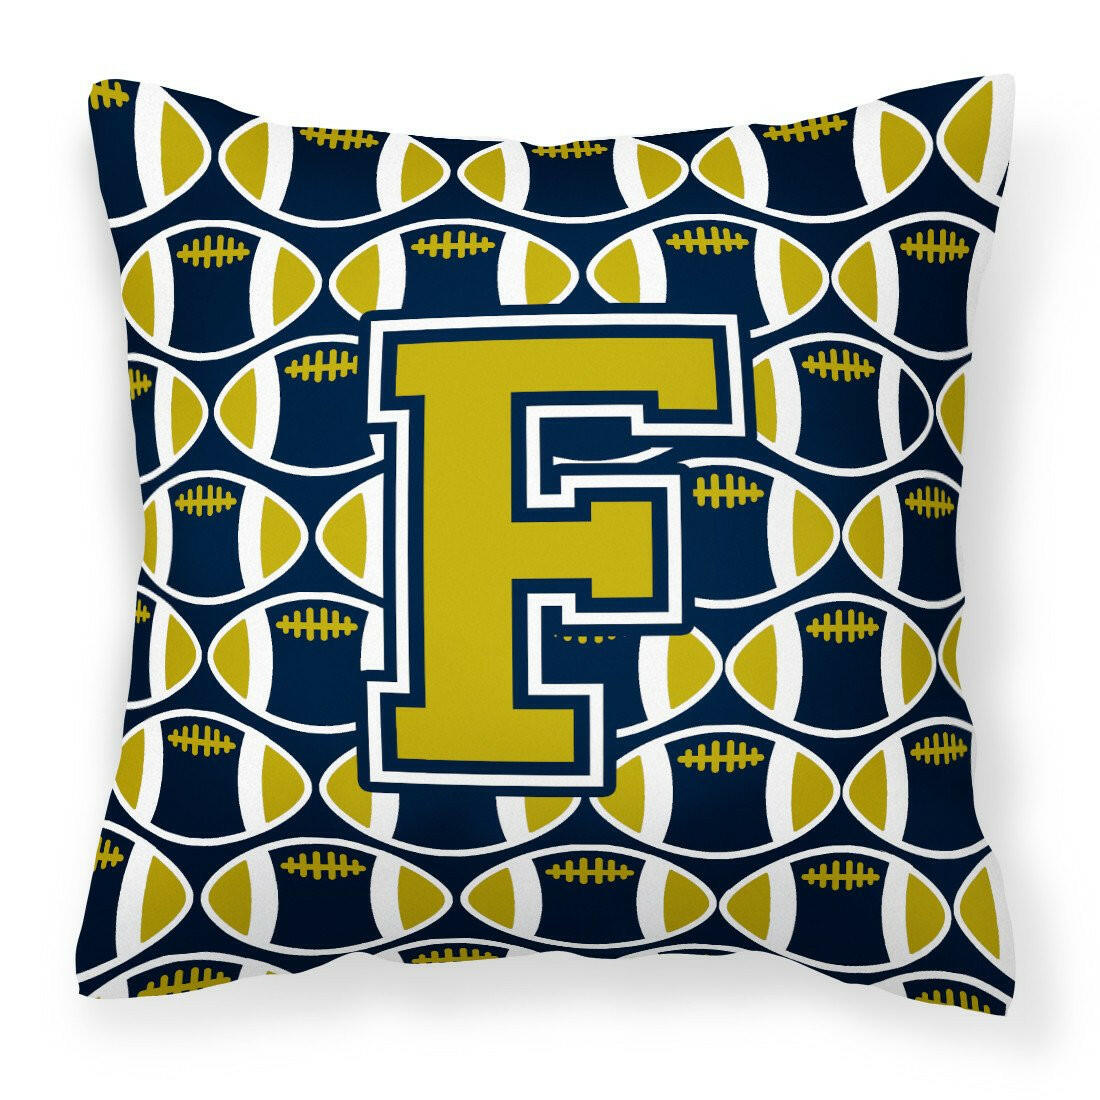 Letter F Football Blue and Gold Fabric Decorative Pillow CJ1074-FPW1414 by Caroline's Treasures